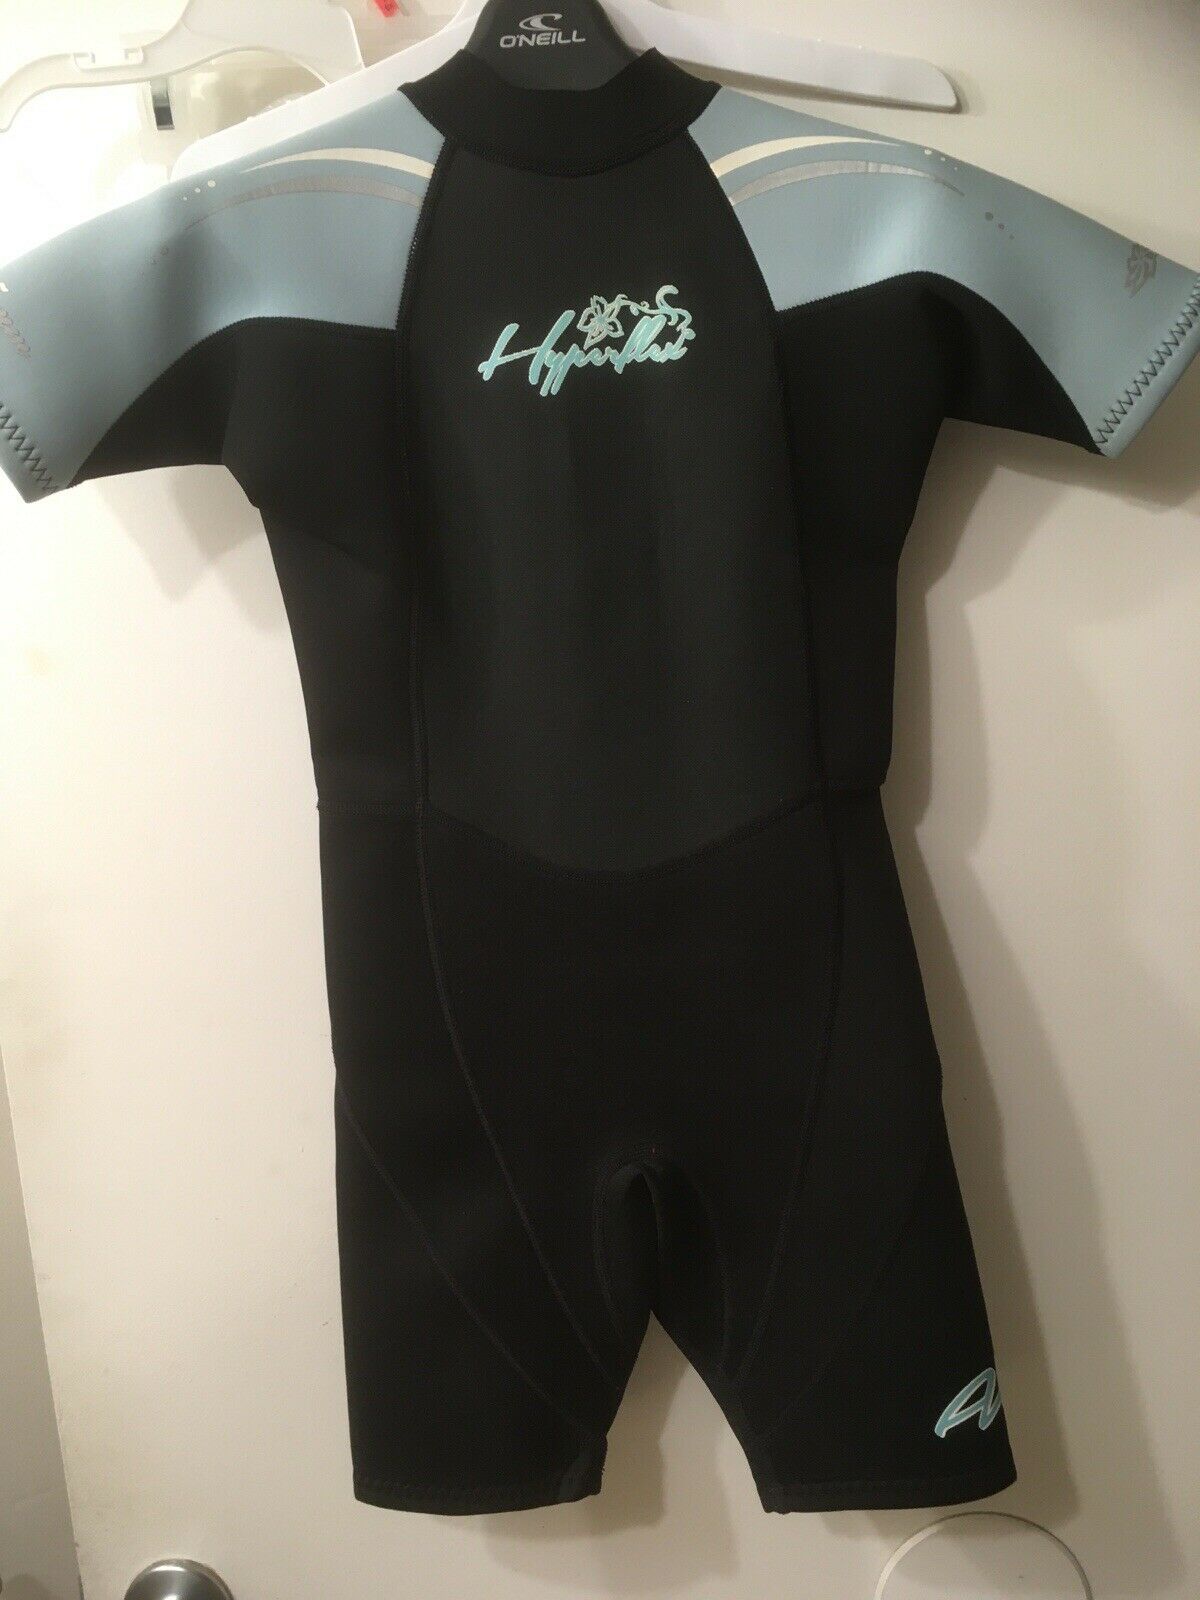 Kids Size 8 Hyperflex Access Shorty Wetsuit Youth Worn 3 Times 2.5mm Clean